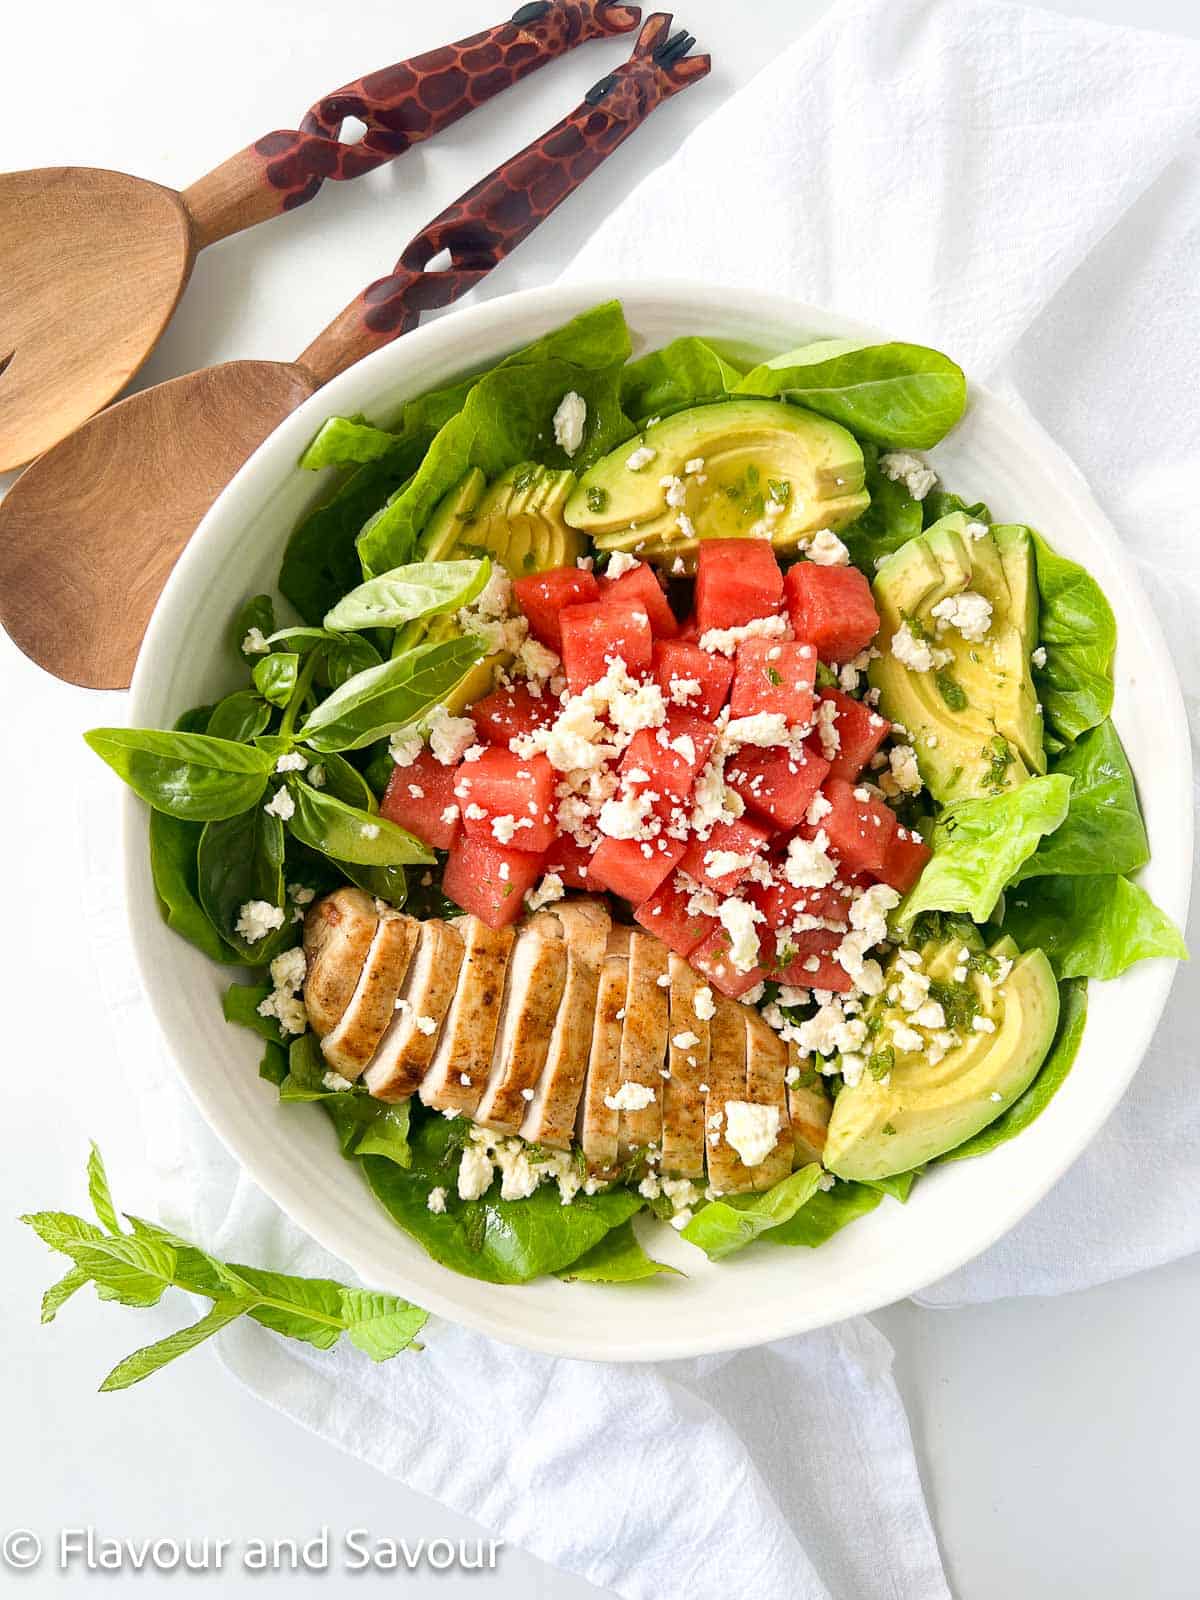 A bowl of greens with sliced chicken breast, watermelon cubes, avocado slices and feta cheese.